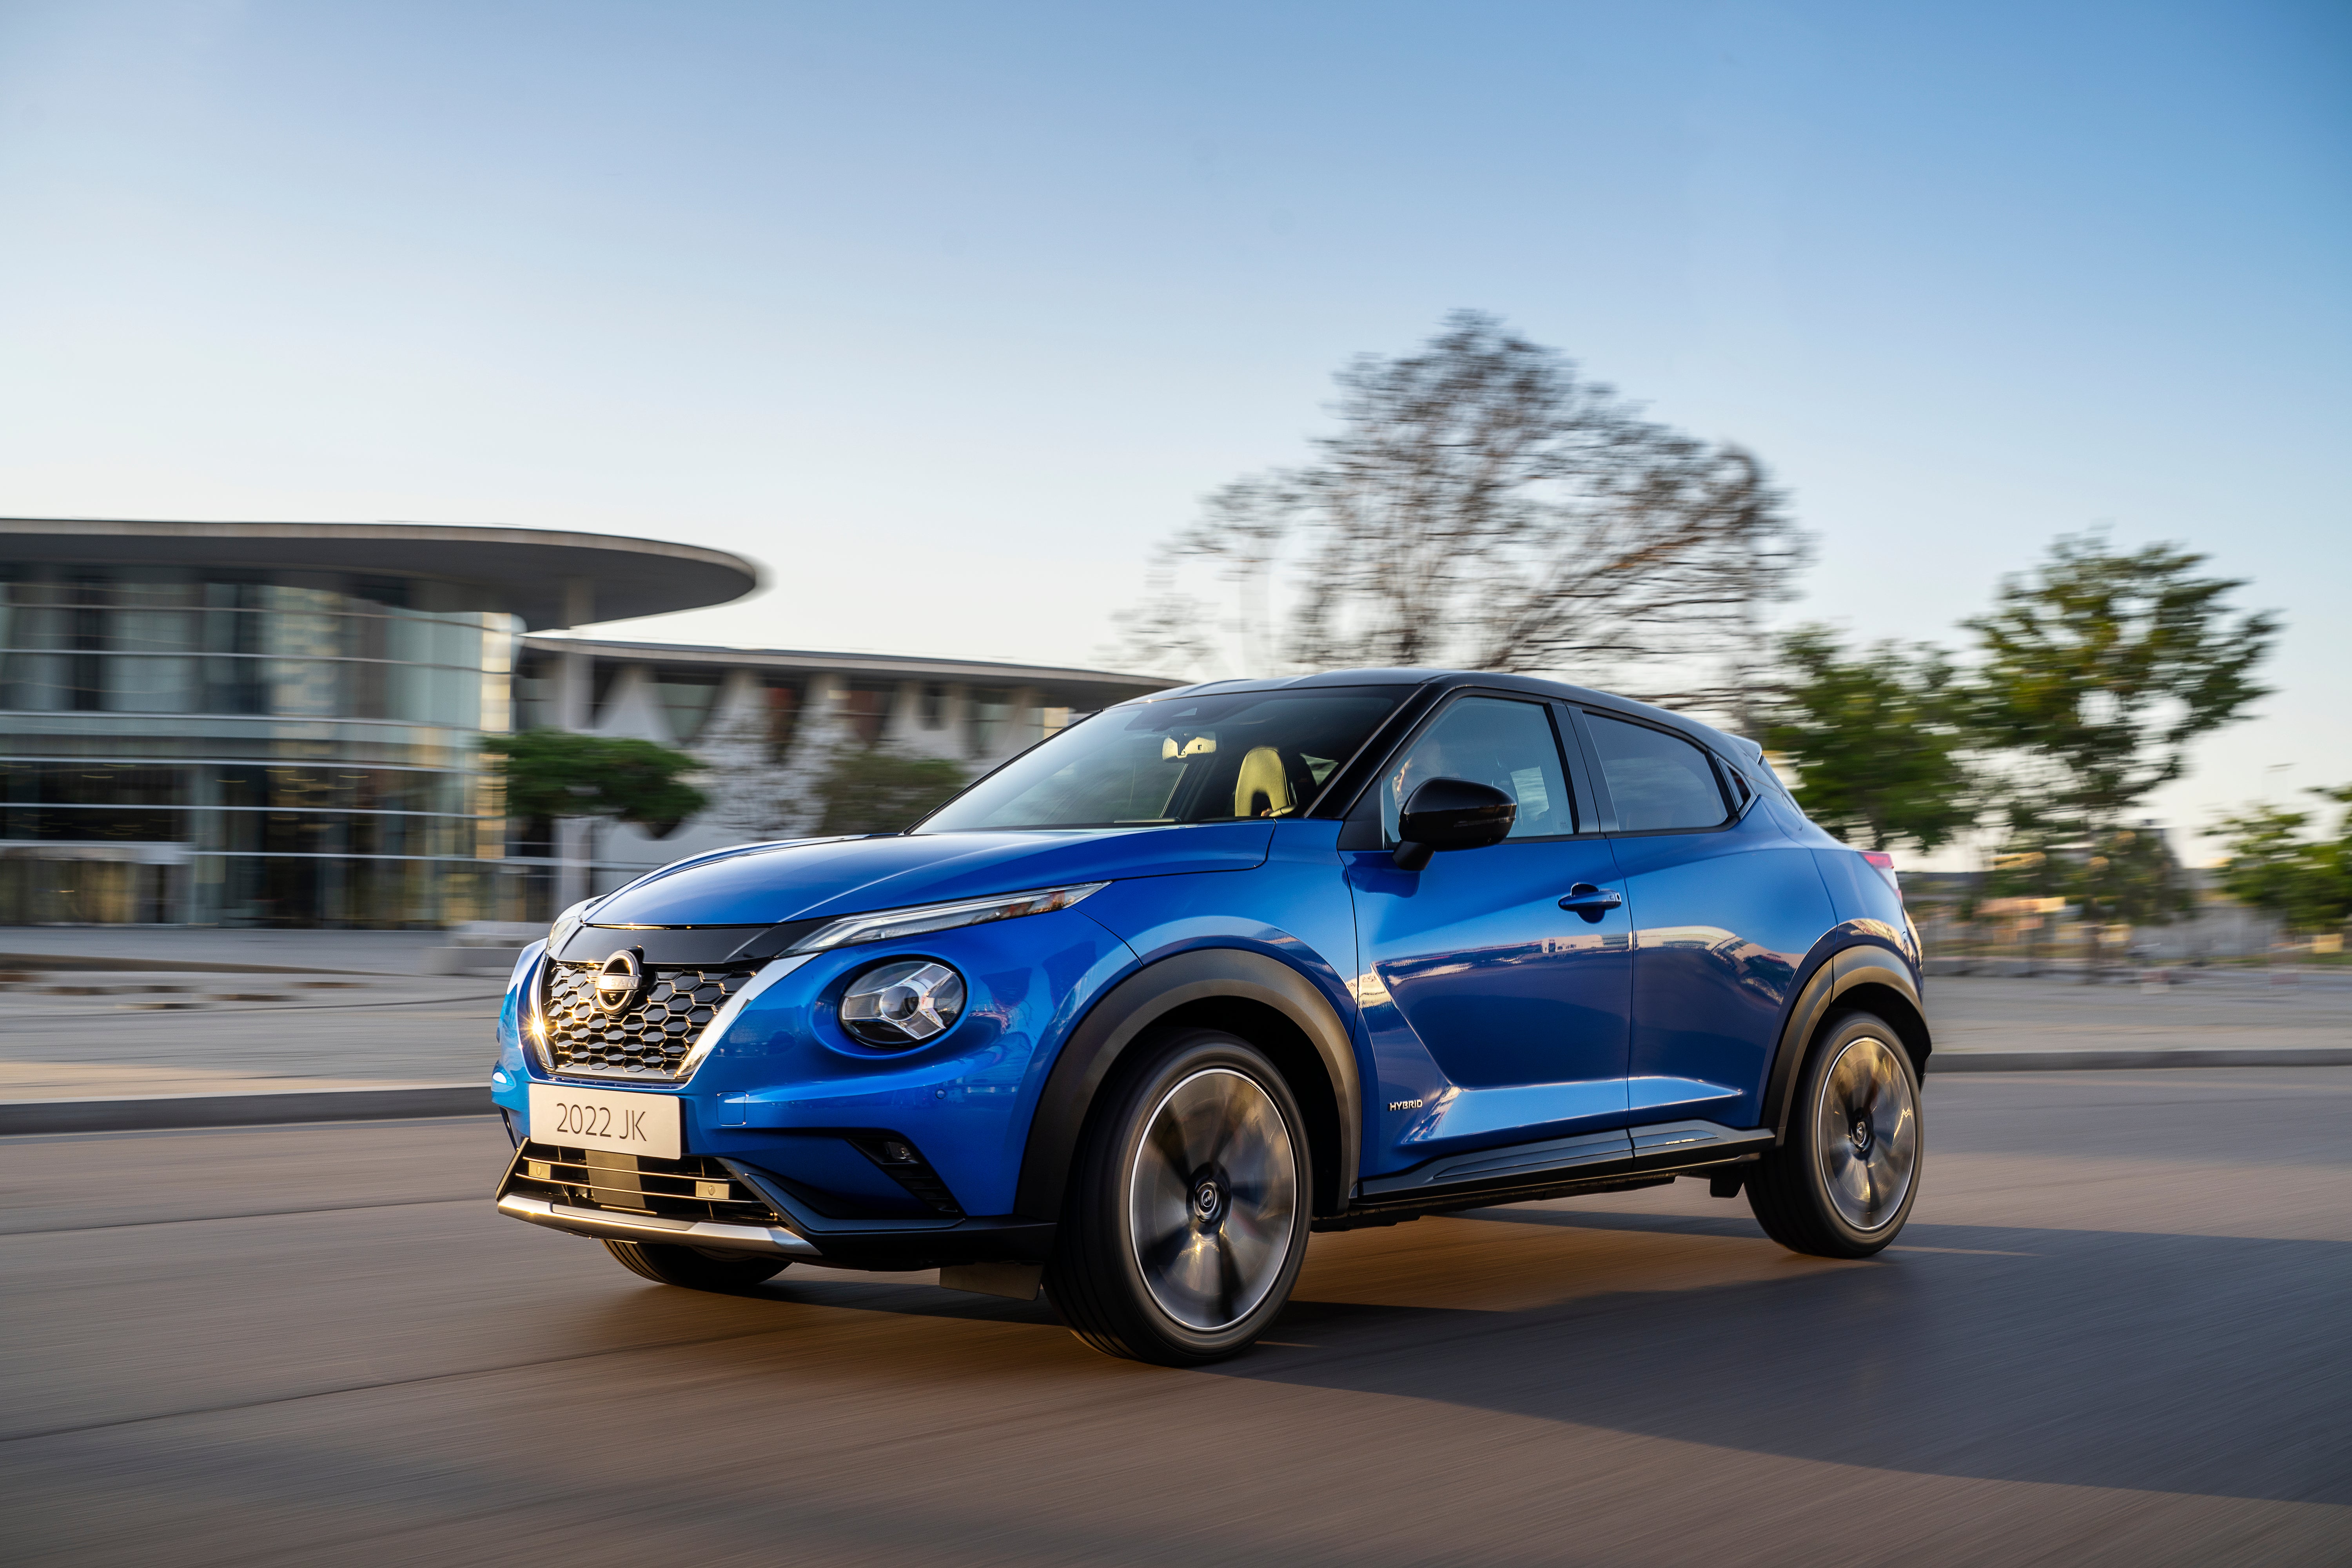 Nissan Juke Hybrid review: Imbued with a spirited, lively personality